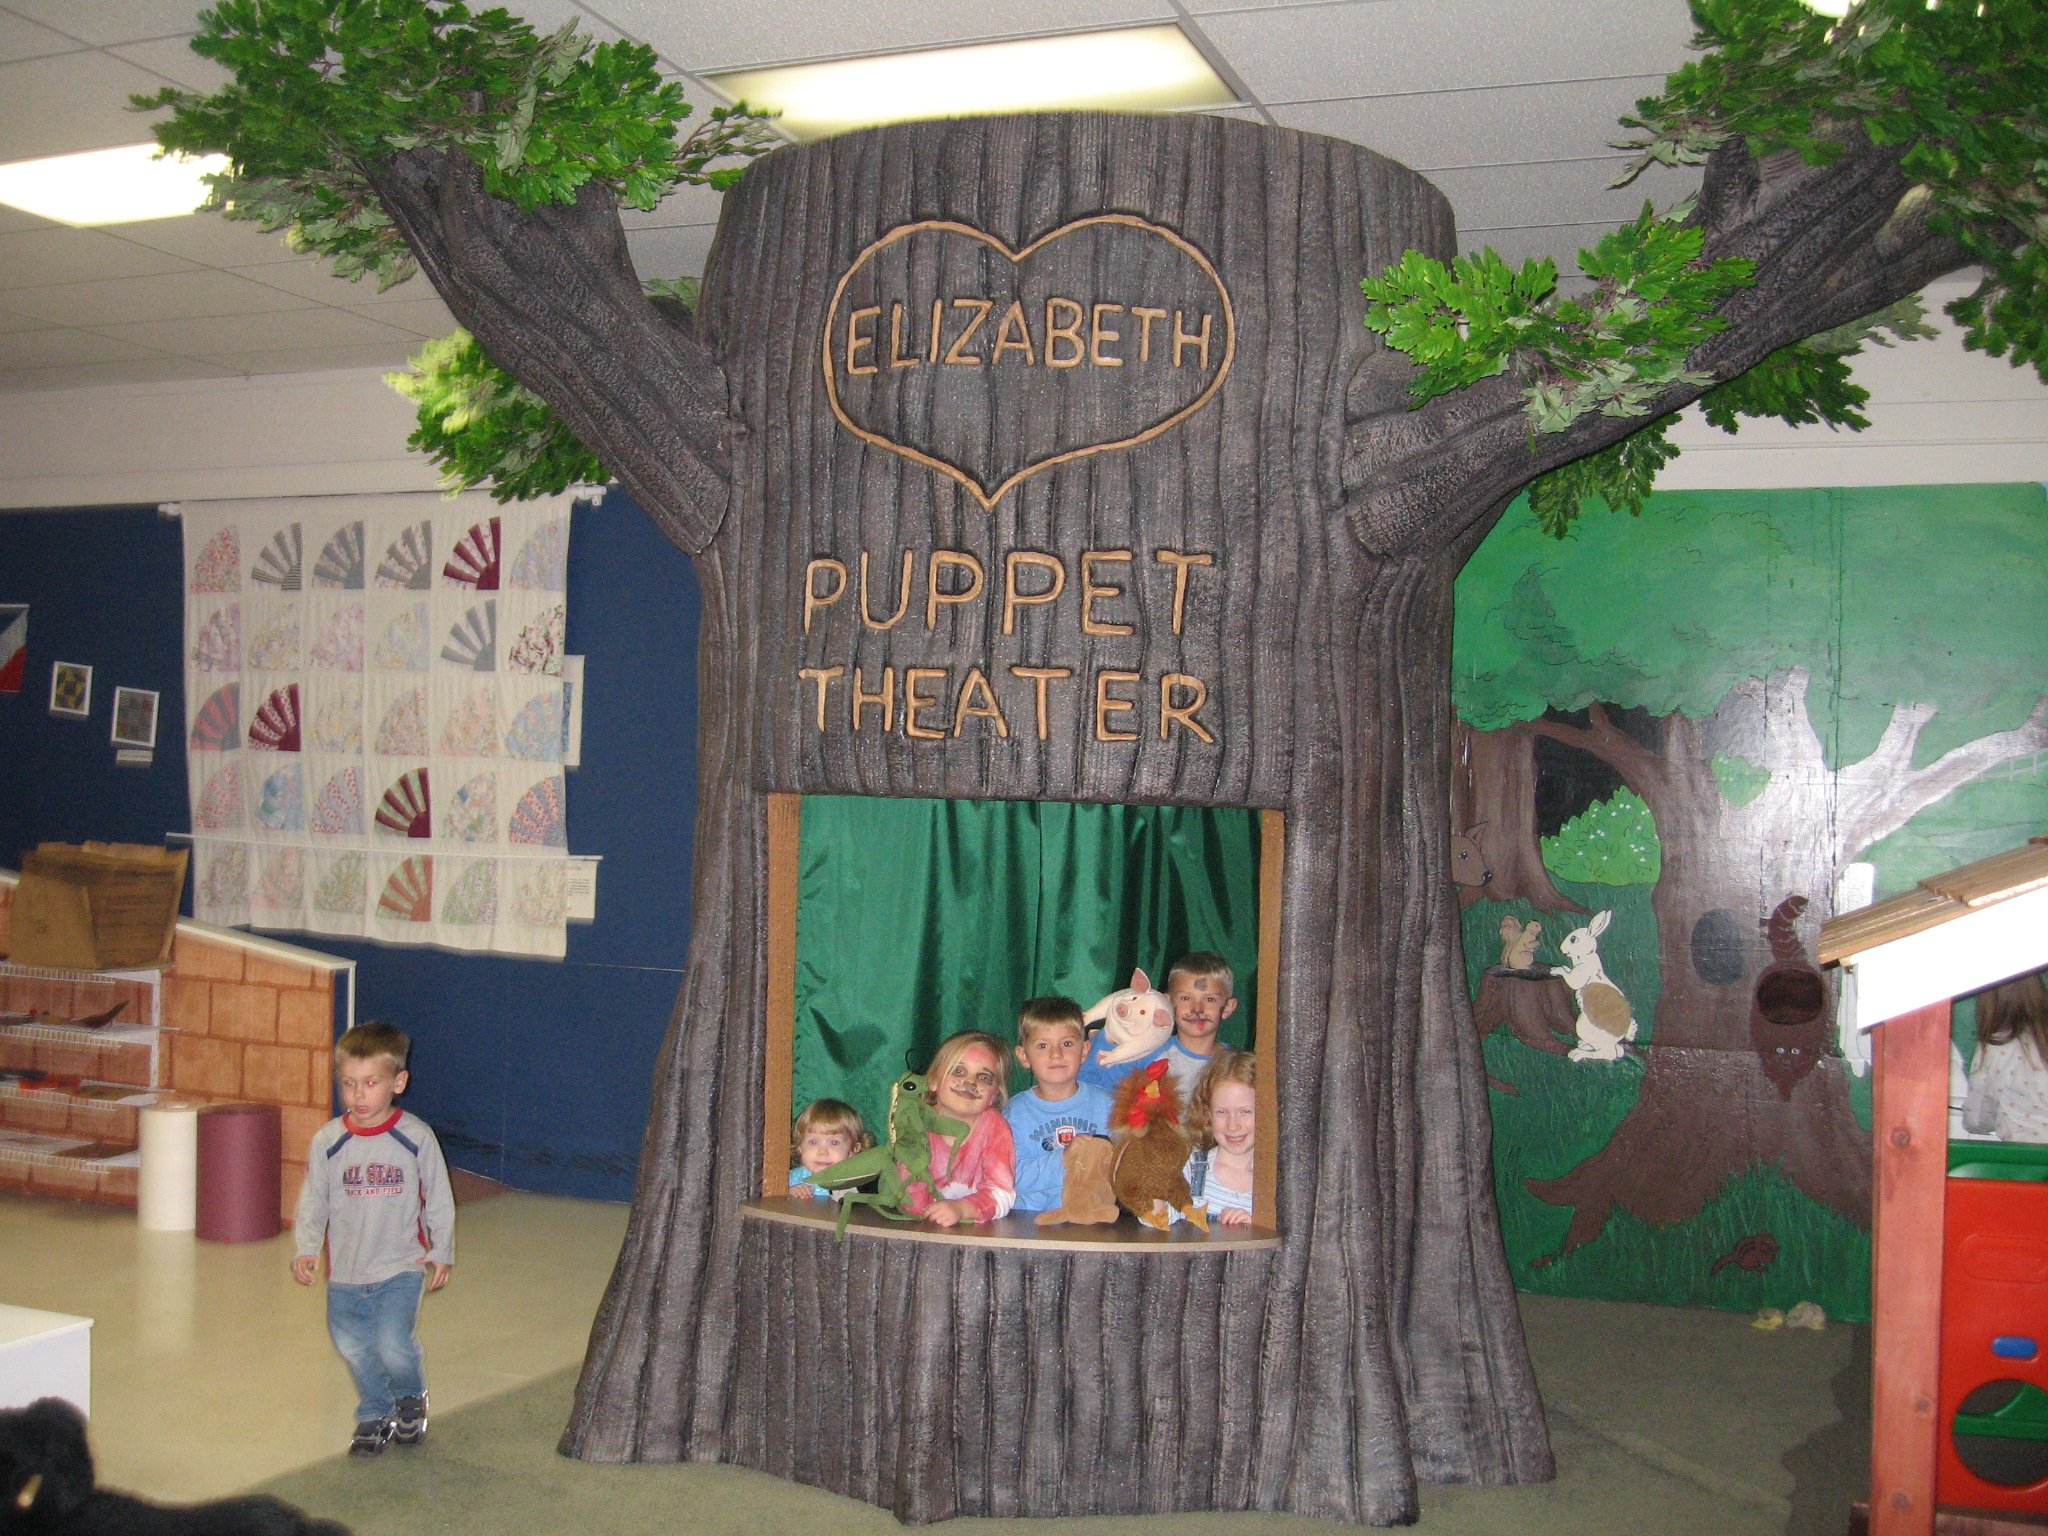  The Museum’s first professionally fabricated exhibit was the Puppet Theater. This was made possible by the Kyle Family as a memorial for their beloved Elizabeth. It is still enjoyed by families at the current location.  